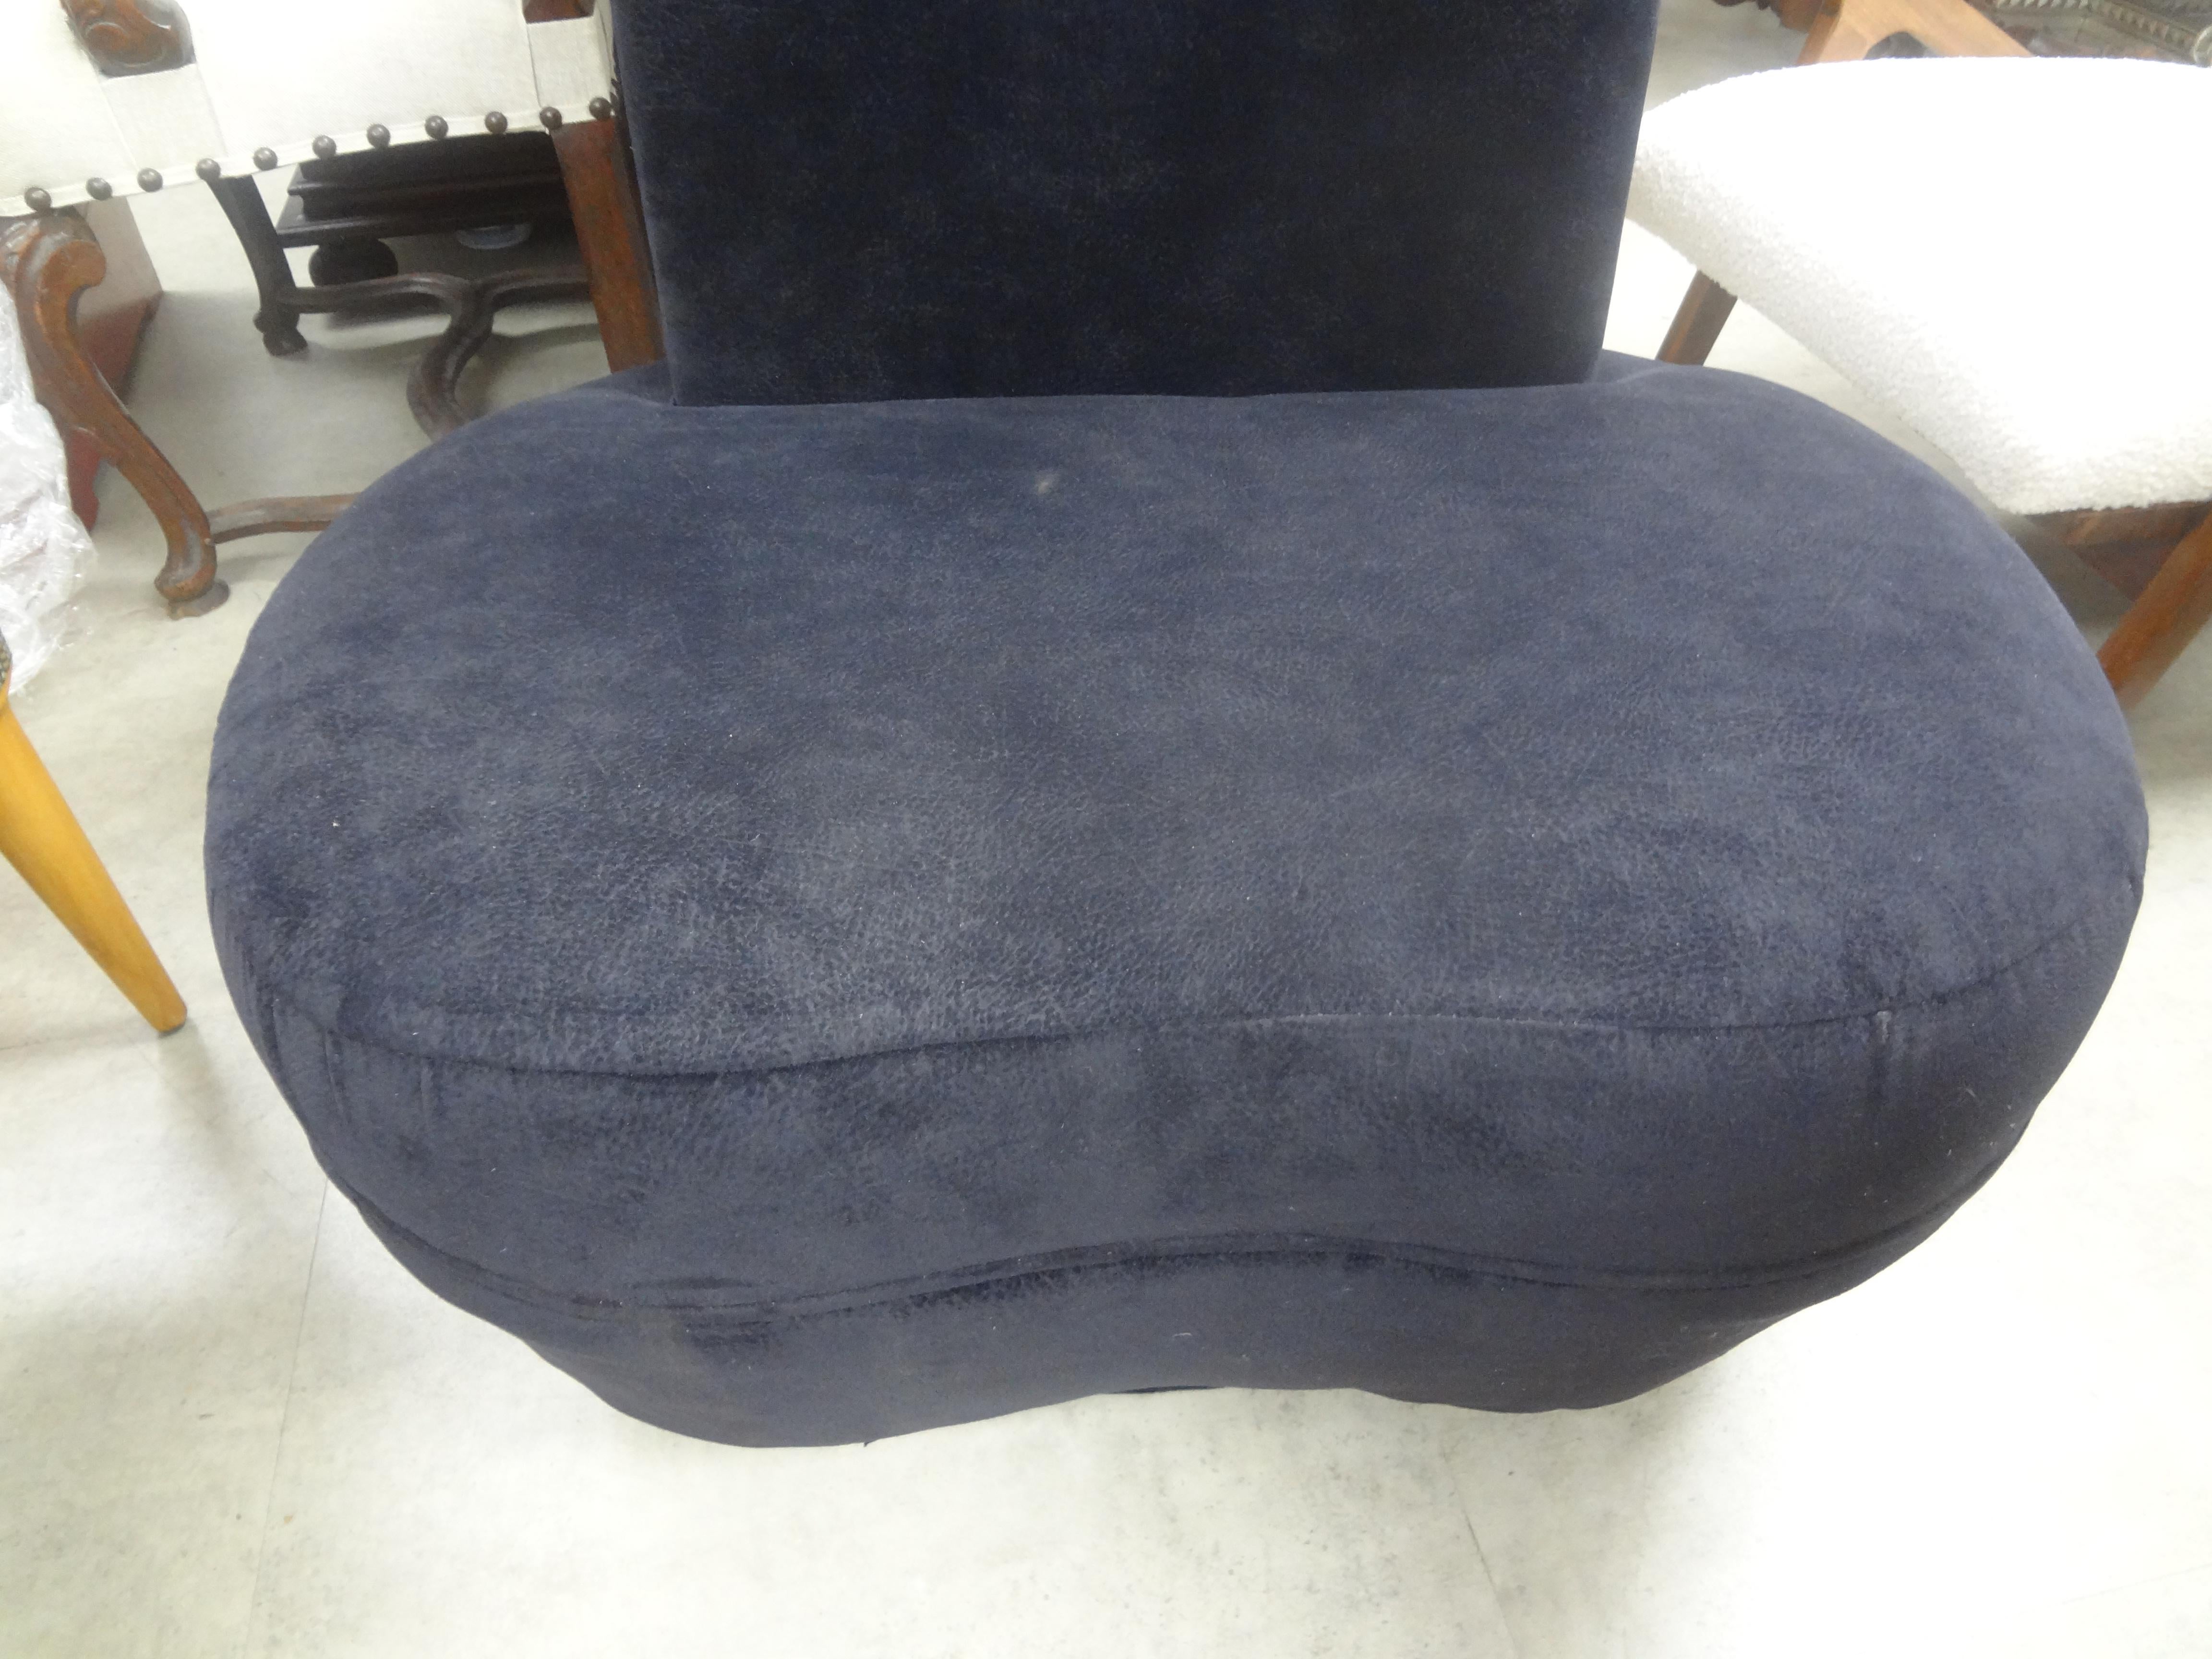 Late 20th Century Postmodern Directional Furniture Style Swivel Chair For Sale